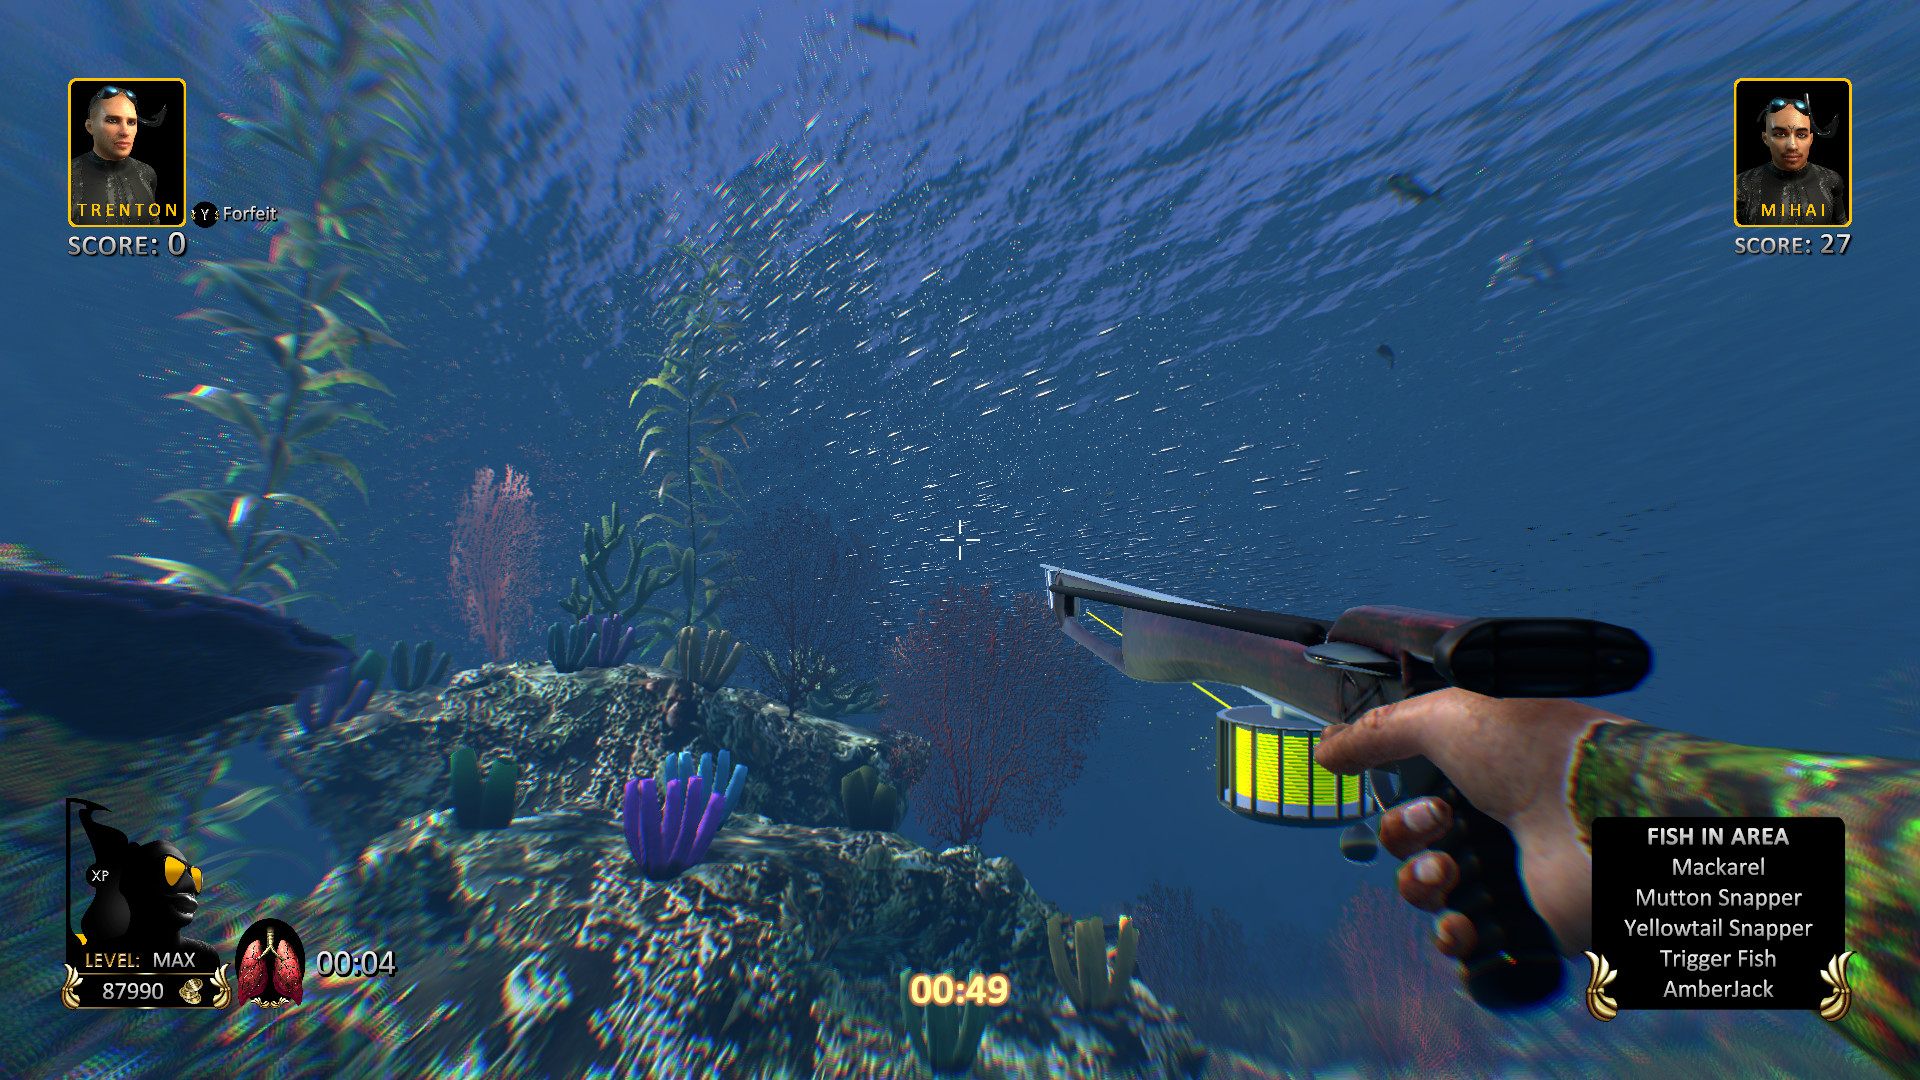 Play Online Scuba Fishing Game by RTG